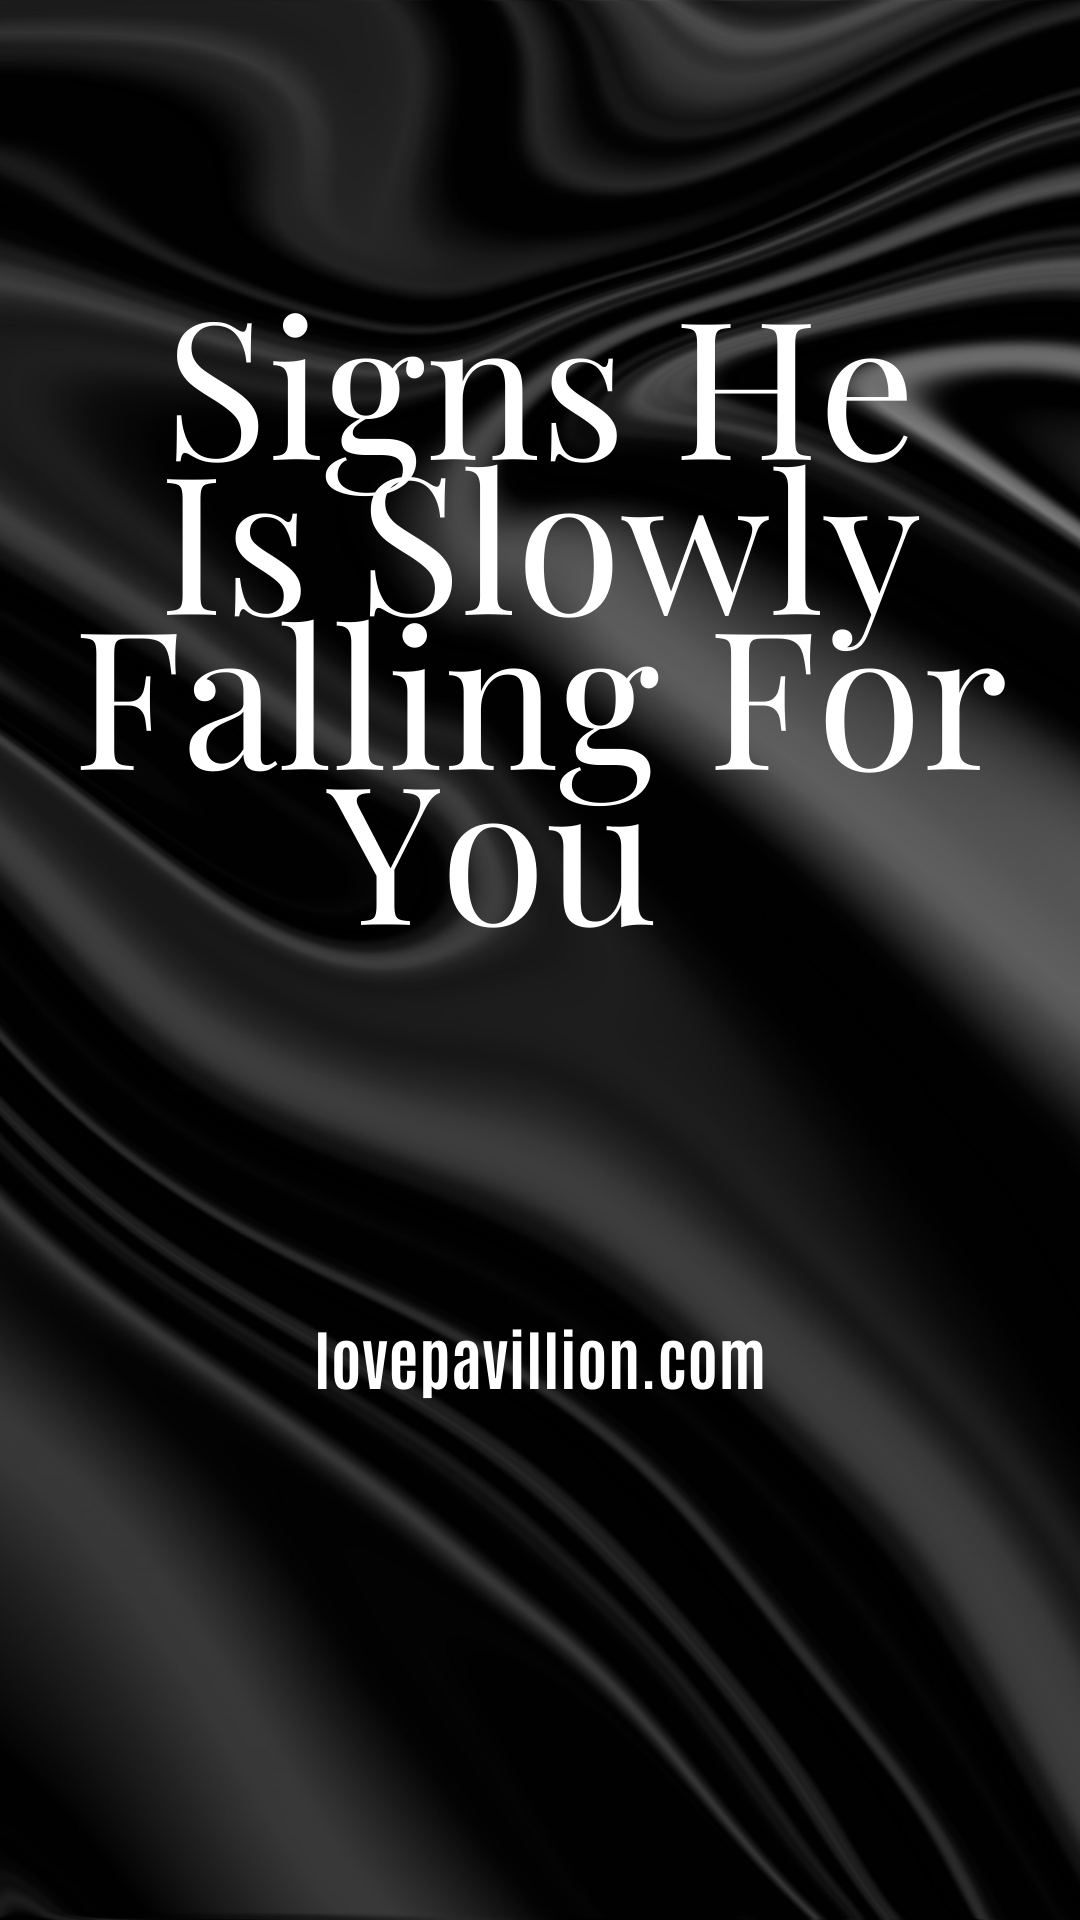 Signs He Is Slowly Falling For You